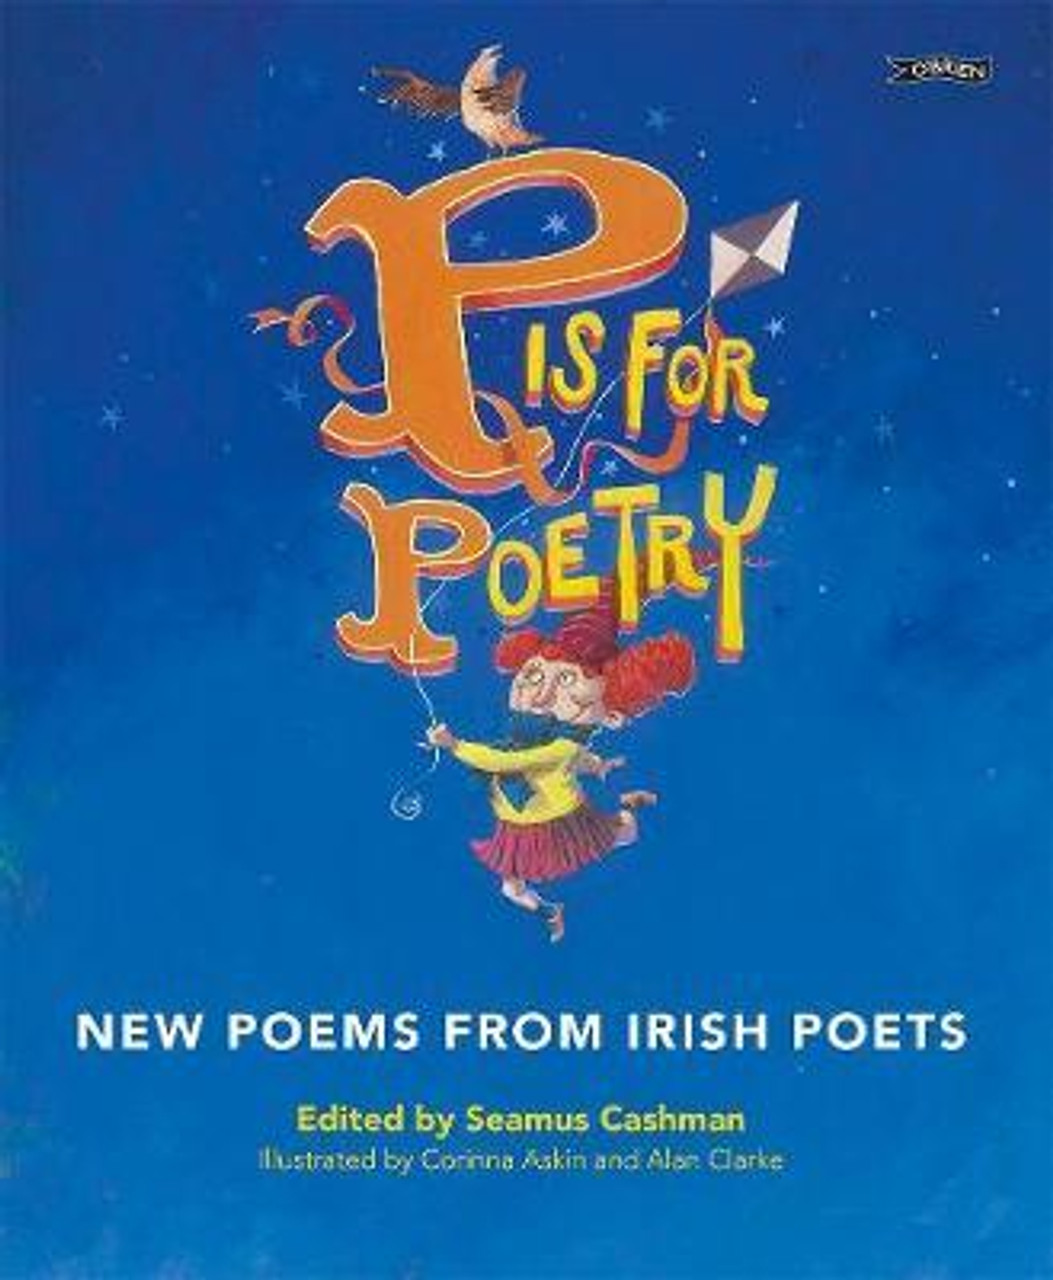 Cashman, Seamus - P is For Poetry : Poems From Irish Poets - PB , O'Brien Press - BRAND NEW